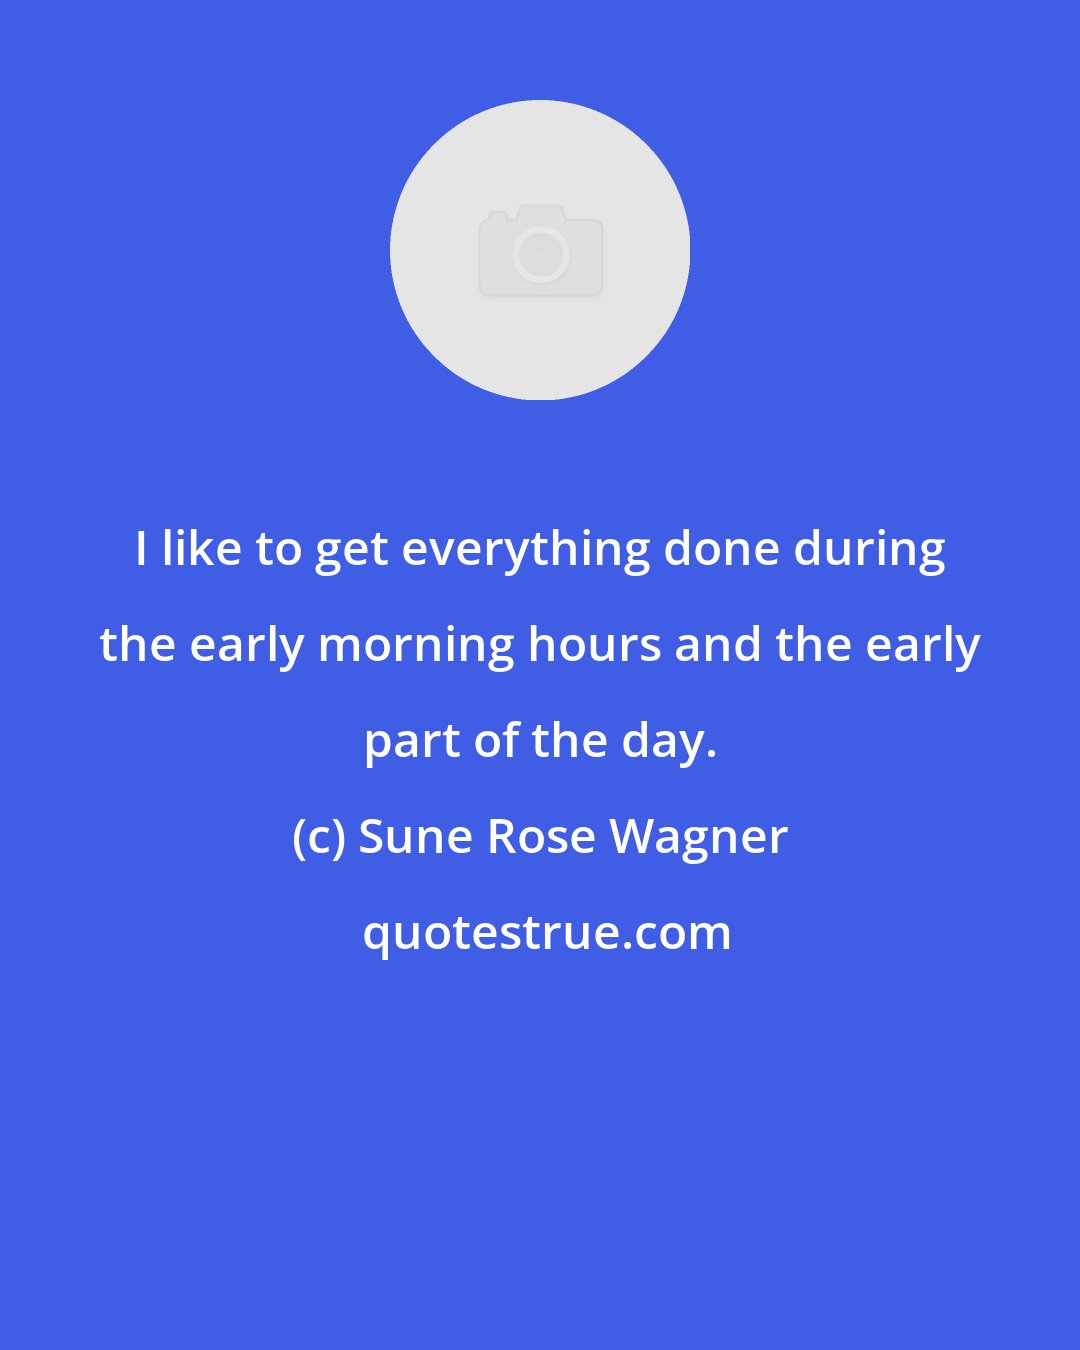 Sune Rose Wagner: I like to get everything done during the early morning hours and the early part of the day.